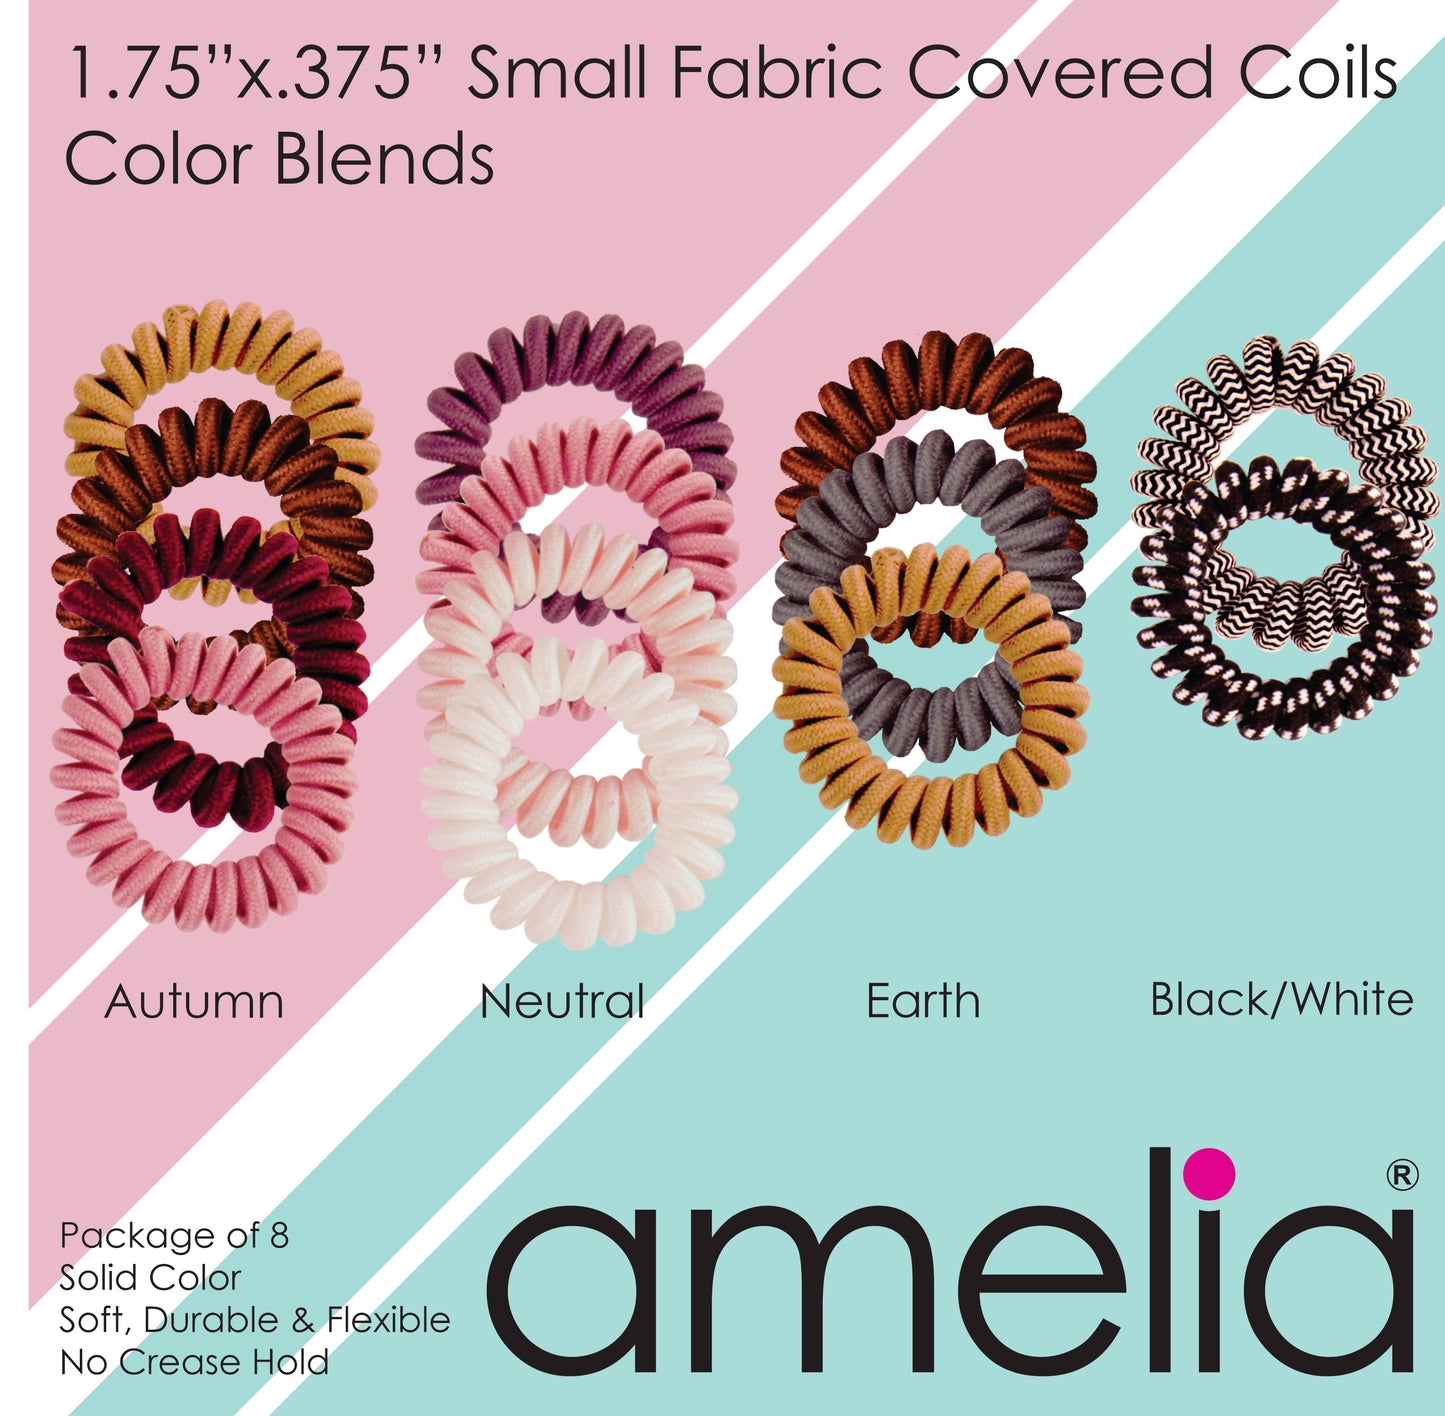 Amelia Beauty, 8 Small Fabric Wrapped Elastic Hair Coils, 1.75in Diameter Spiral Hair Ties, Gentle on Hair, Strong Hold and Minimizes Dents and Creases, Black with White Stripe